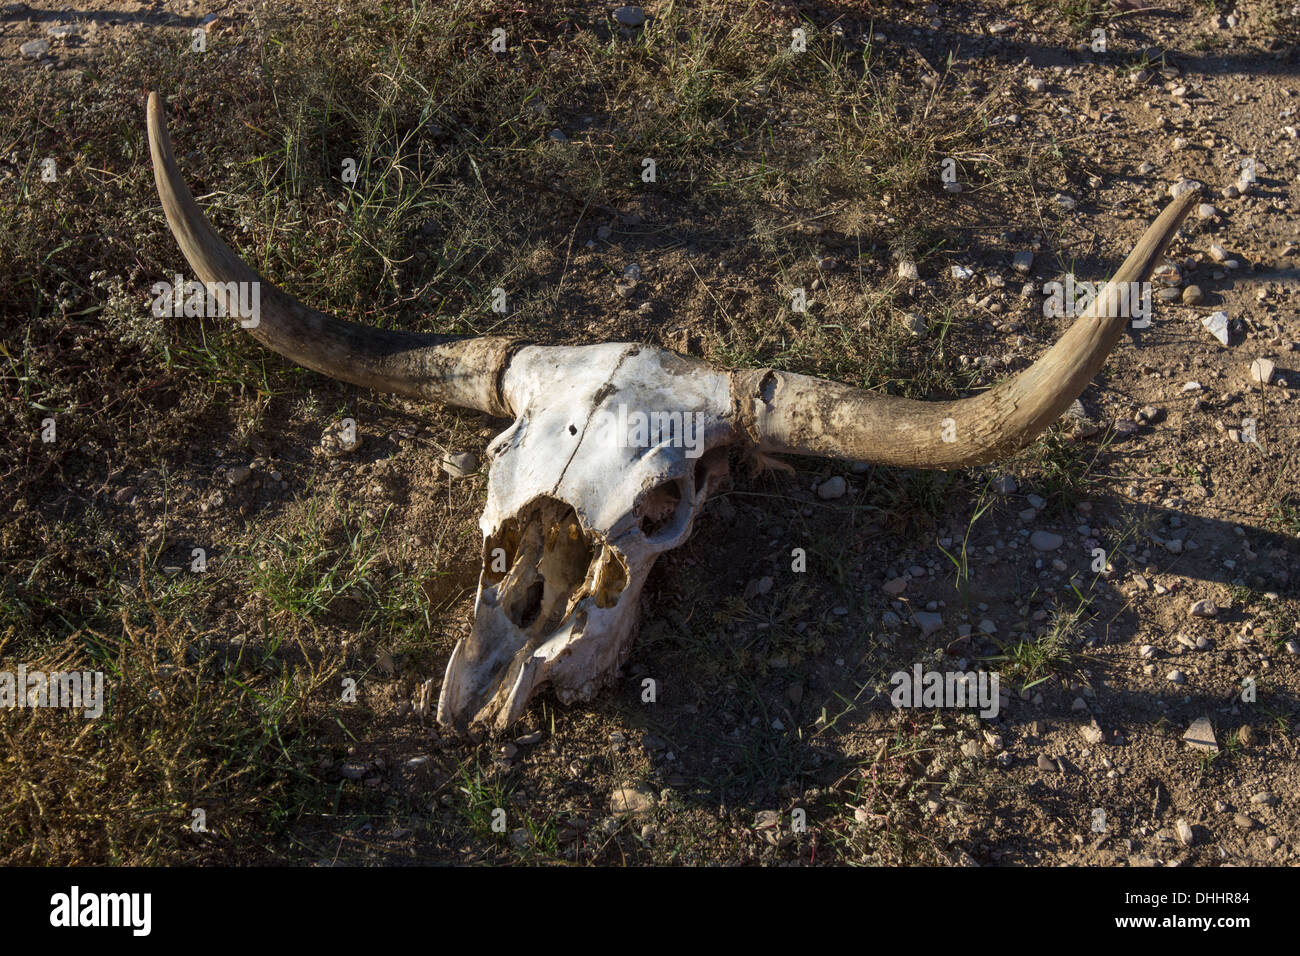 Longhorn cow skull on display on a ranch in West Texas. Stock Photo